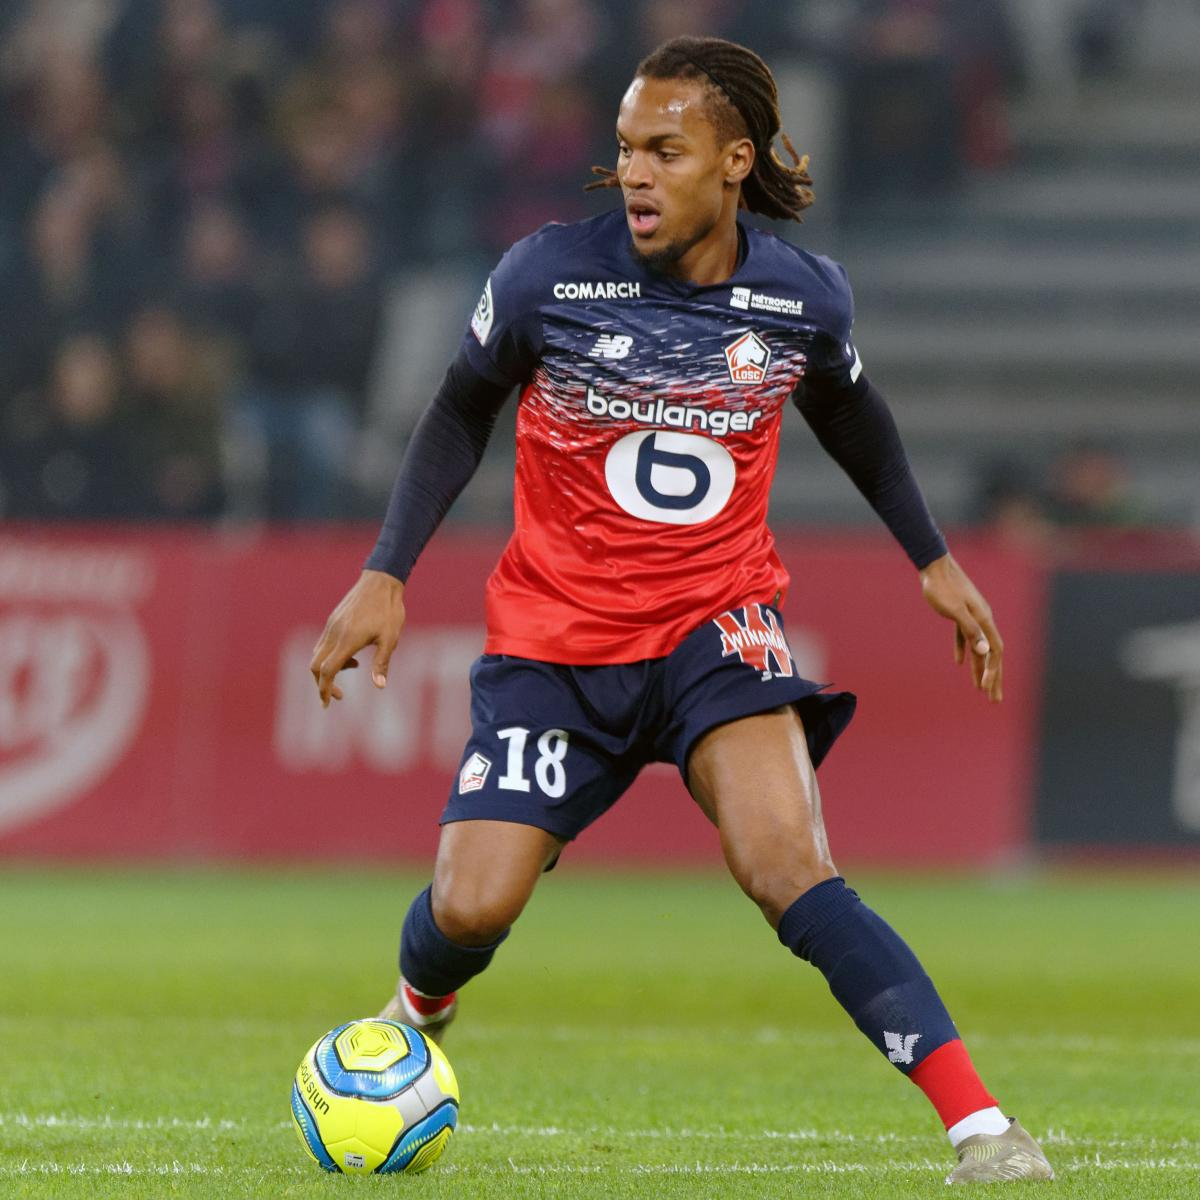 Renato Sanches:A true comeback for Sanches - he's an outlier in key passes, touches in total, touches in middle 3rd, target in passes, SCA through dead ball situations, passes made to switch the play.He's clearly having his renaissance at Lille.